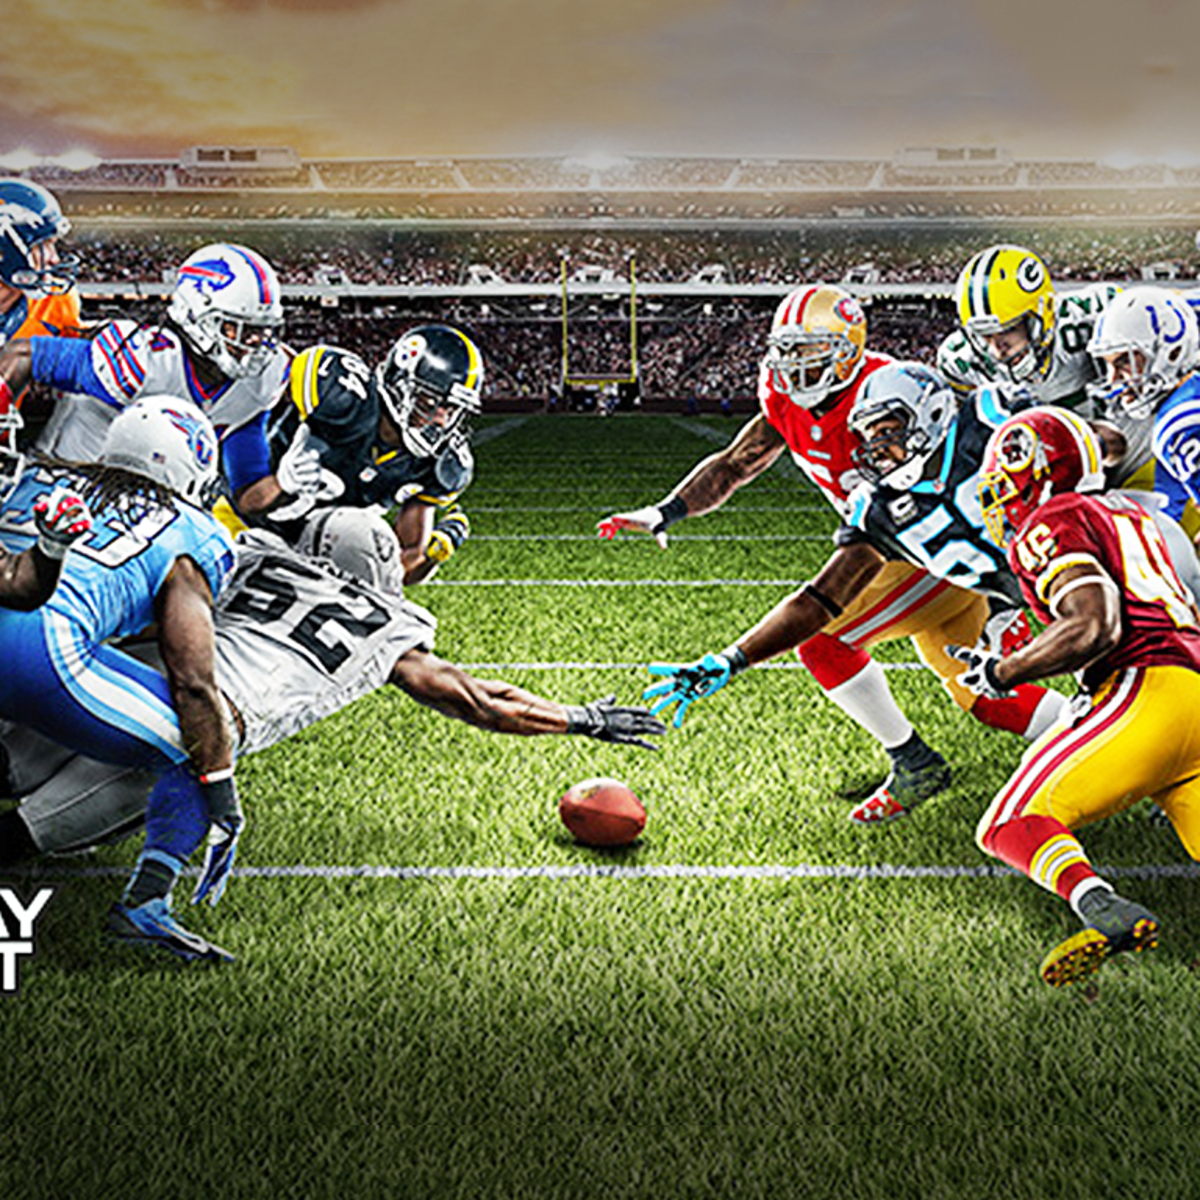 Apple, , Disney Are In Battle Royale For NFL Sunday Ticket - TheStreet